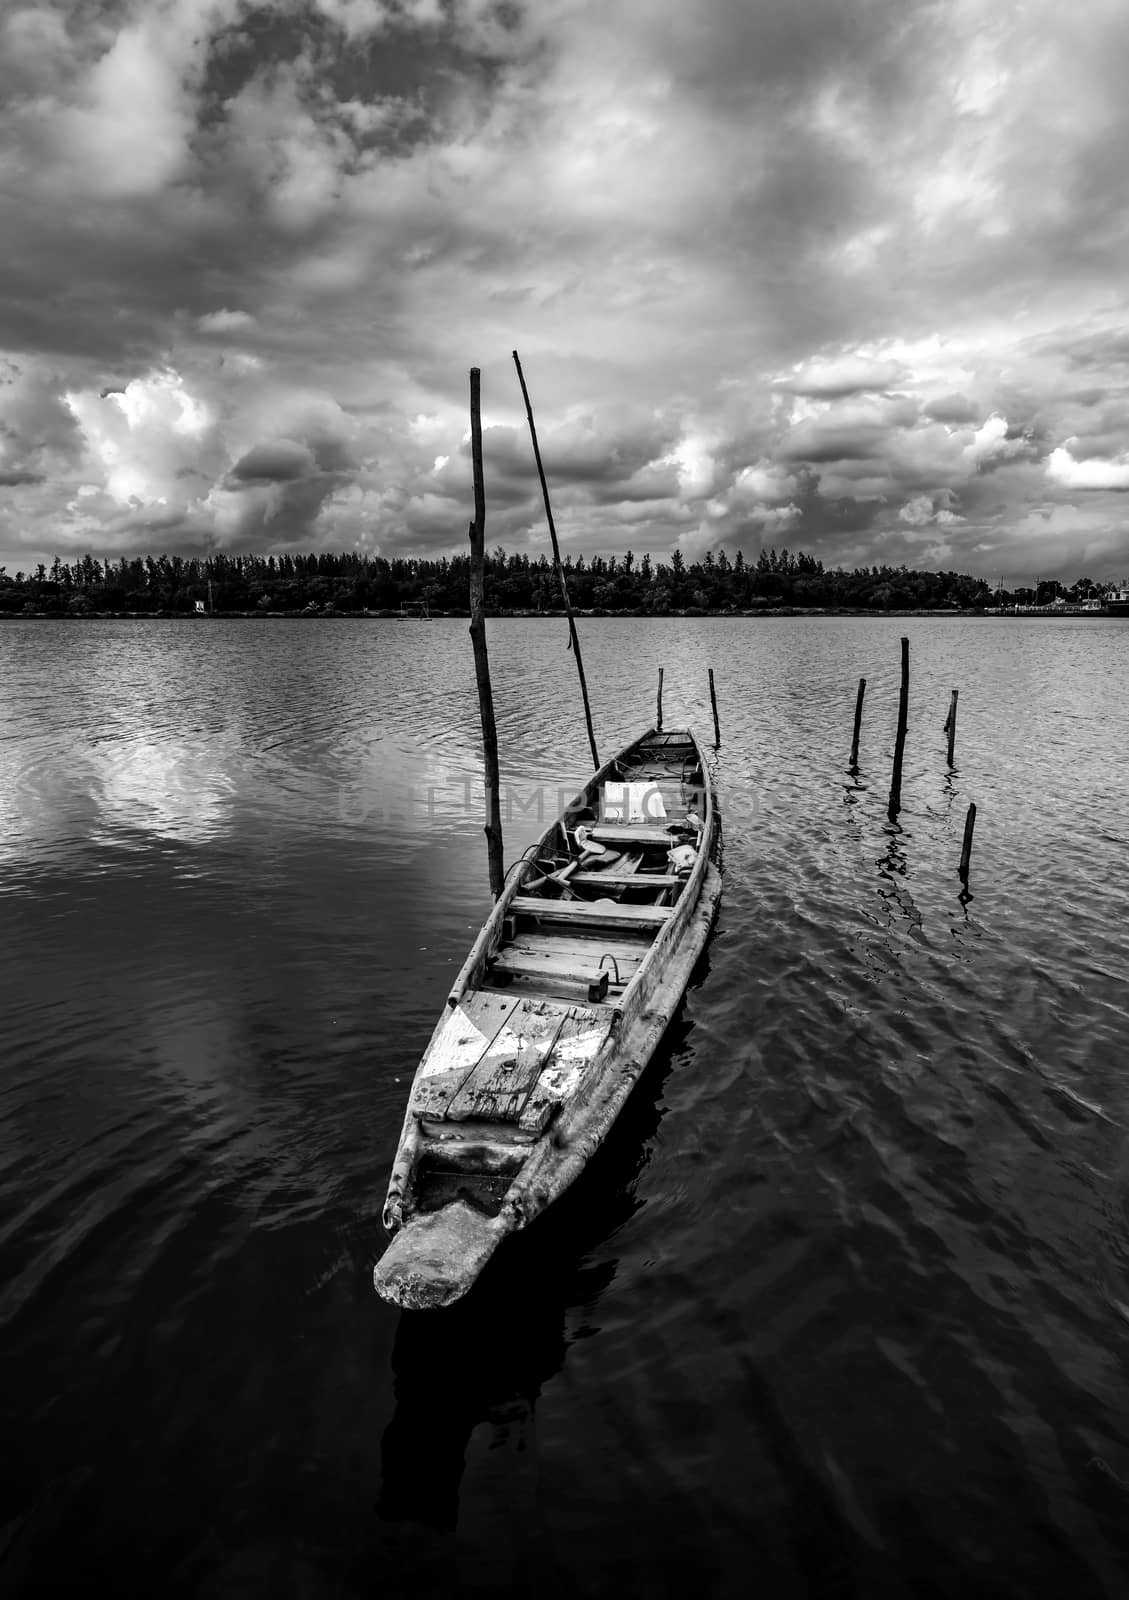 Fishing boat with view of landscape nature in sky and cloud storm and river in stormy rain season, Black and white and monochrome style